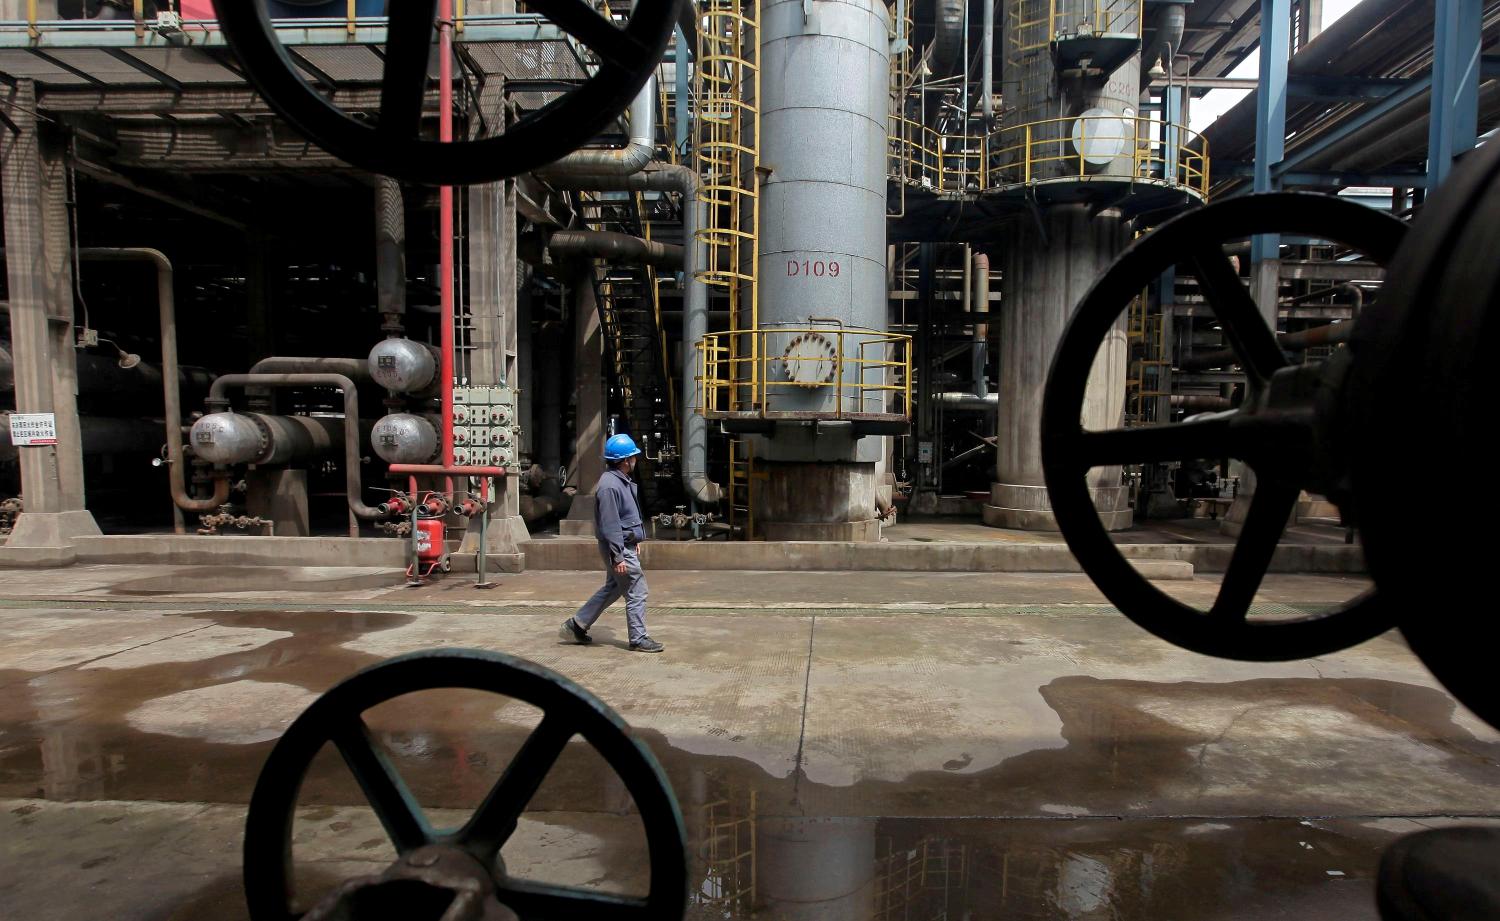 A worker walks past oil pipes at a refinery in Wuhan, Hubei province March 23, 2012. REUTERS/Stringer/File Photo - S1BETTQQDPAA